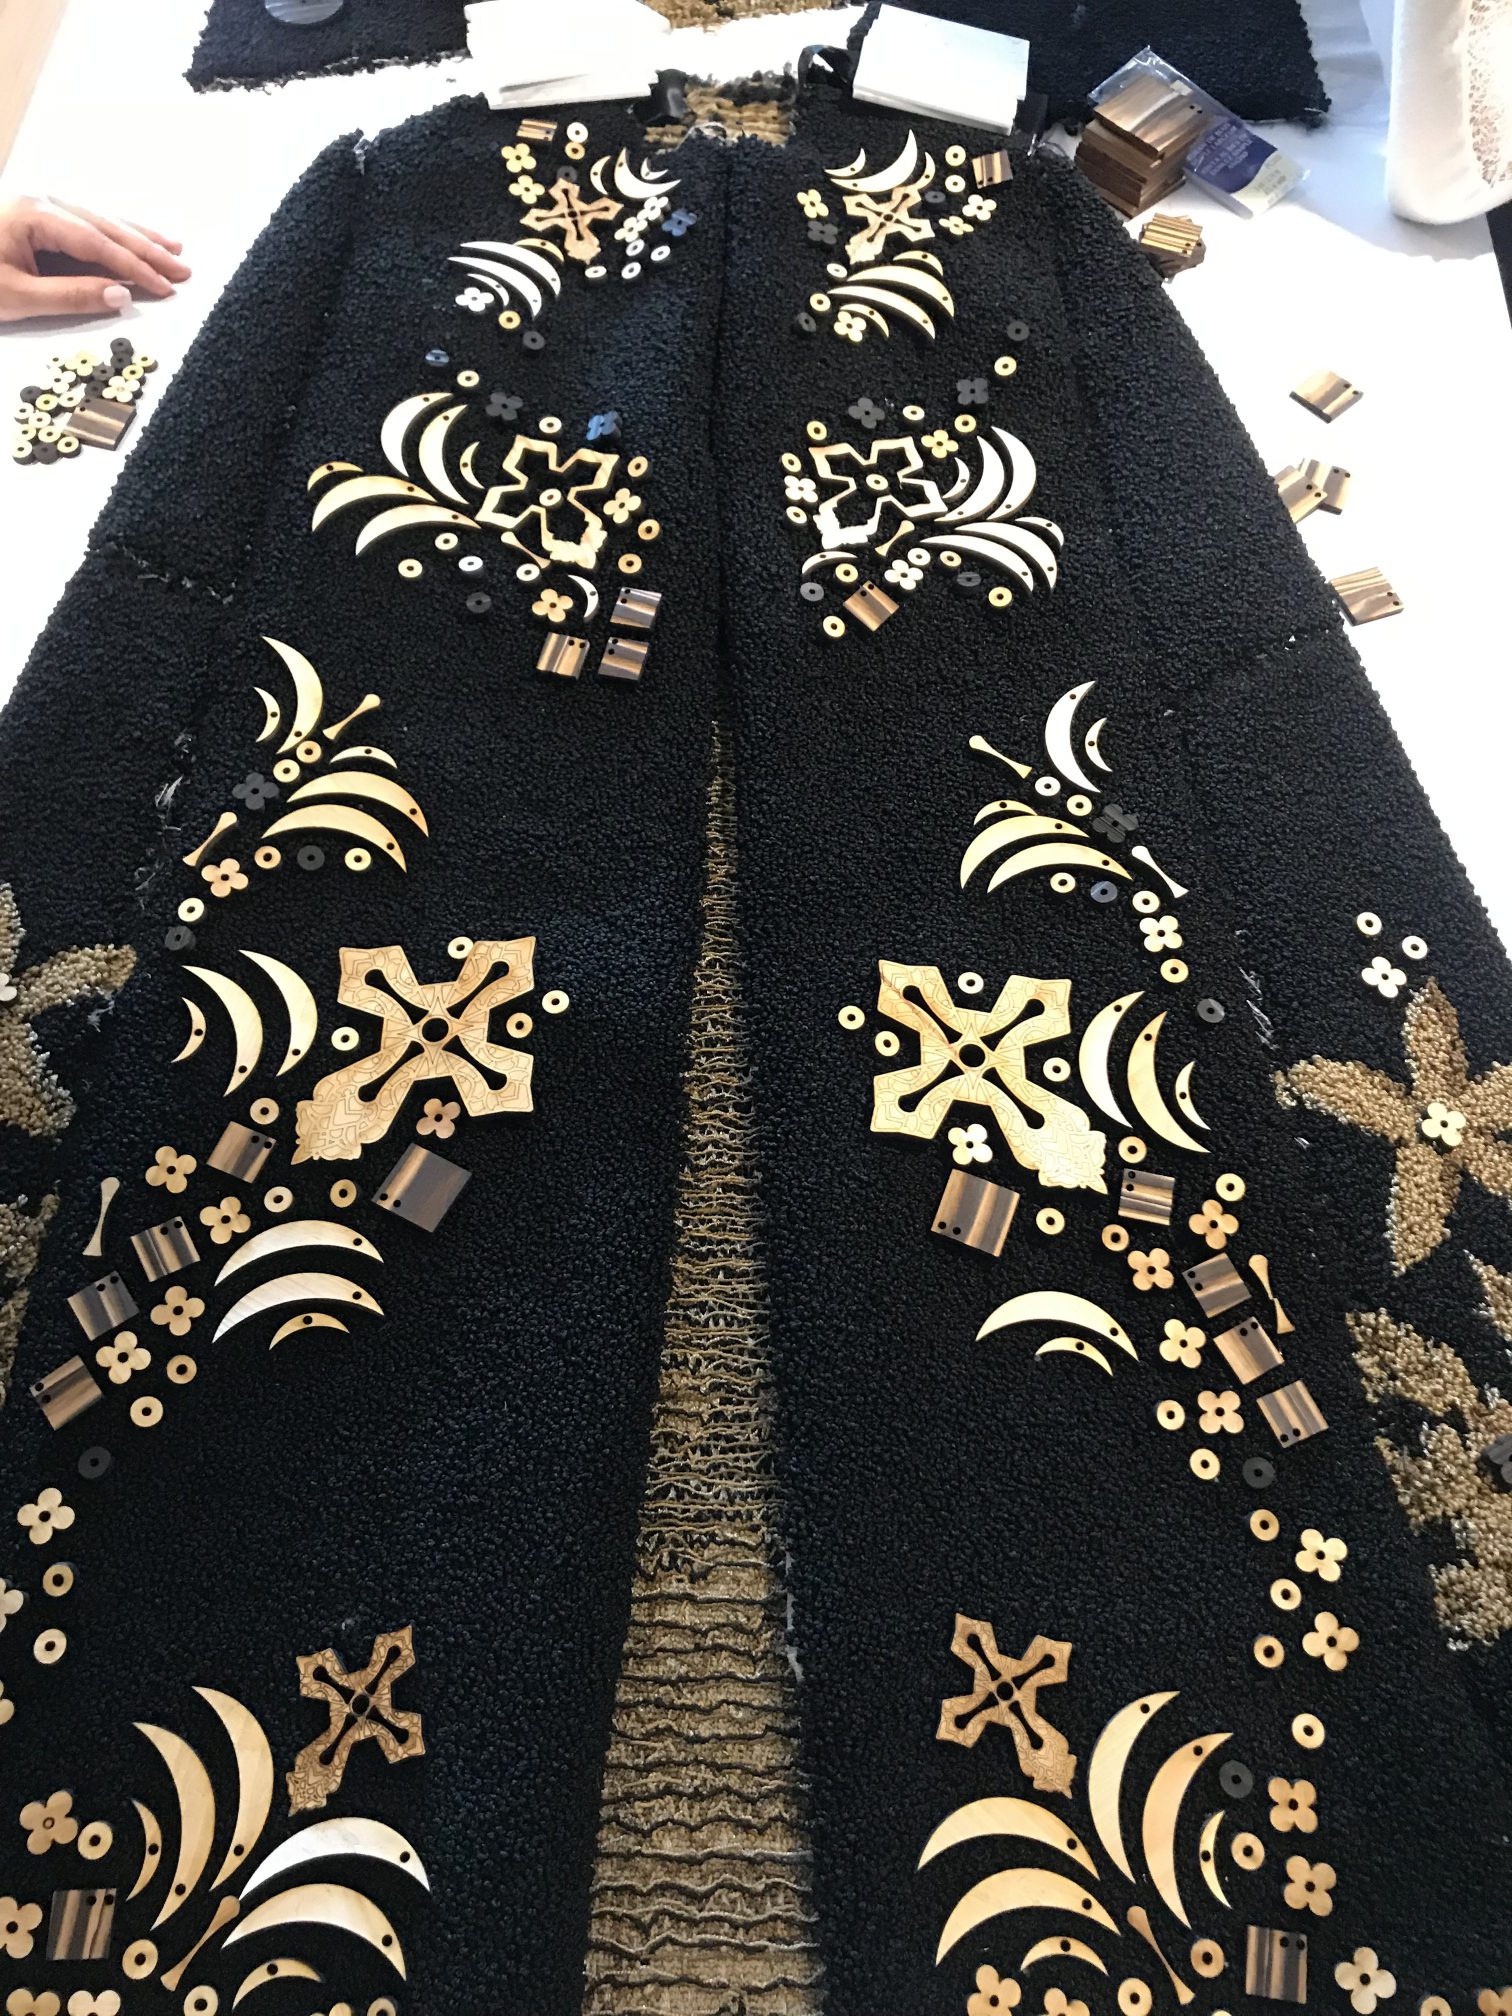 Black and gold jacket with wooden details